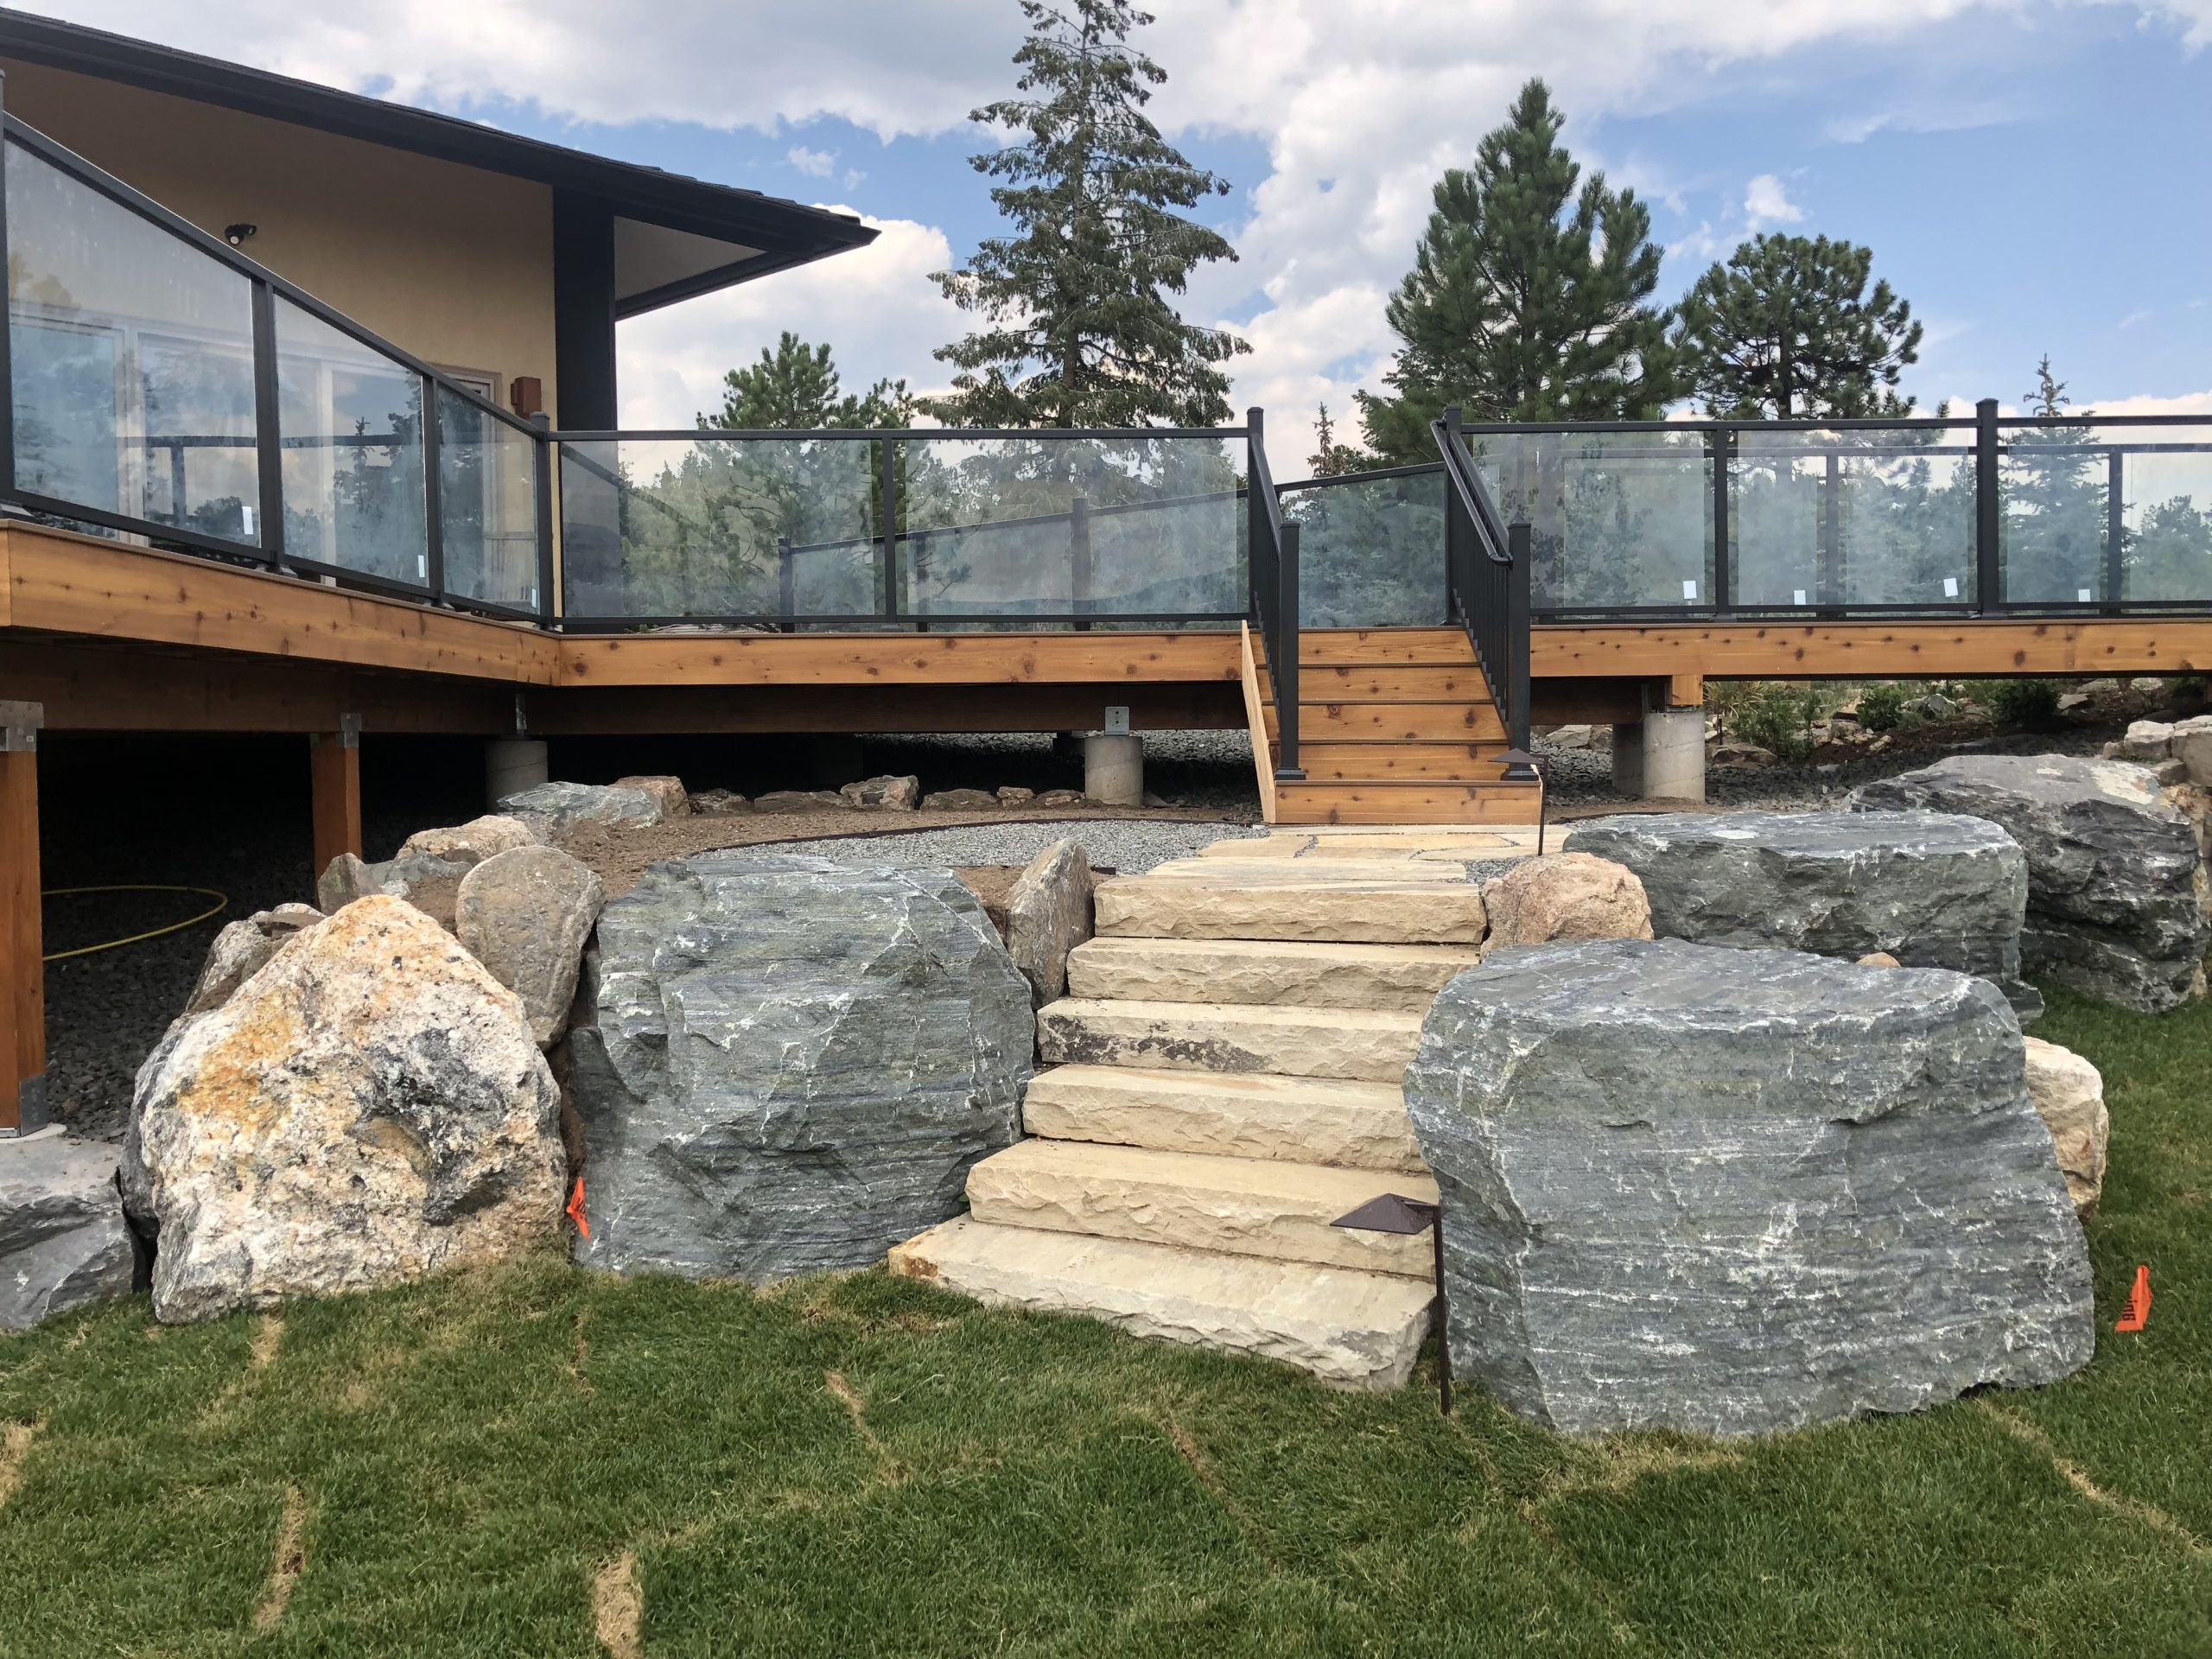 Large boulder surround stone staircase leading to deck with black railings and glass